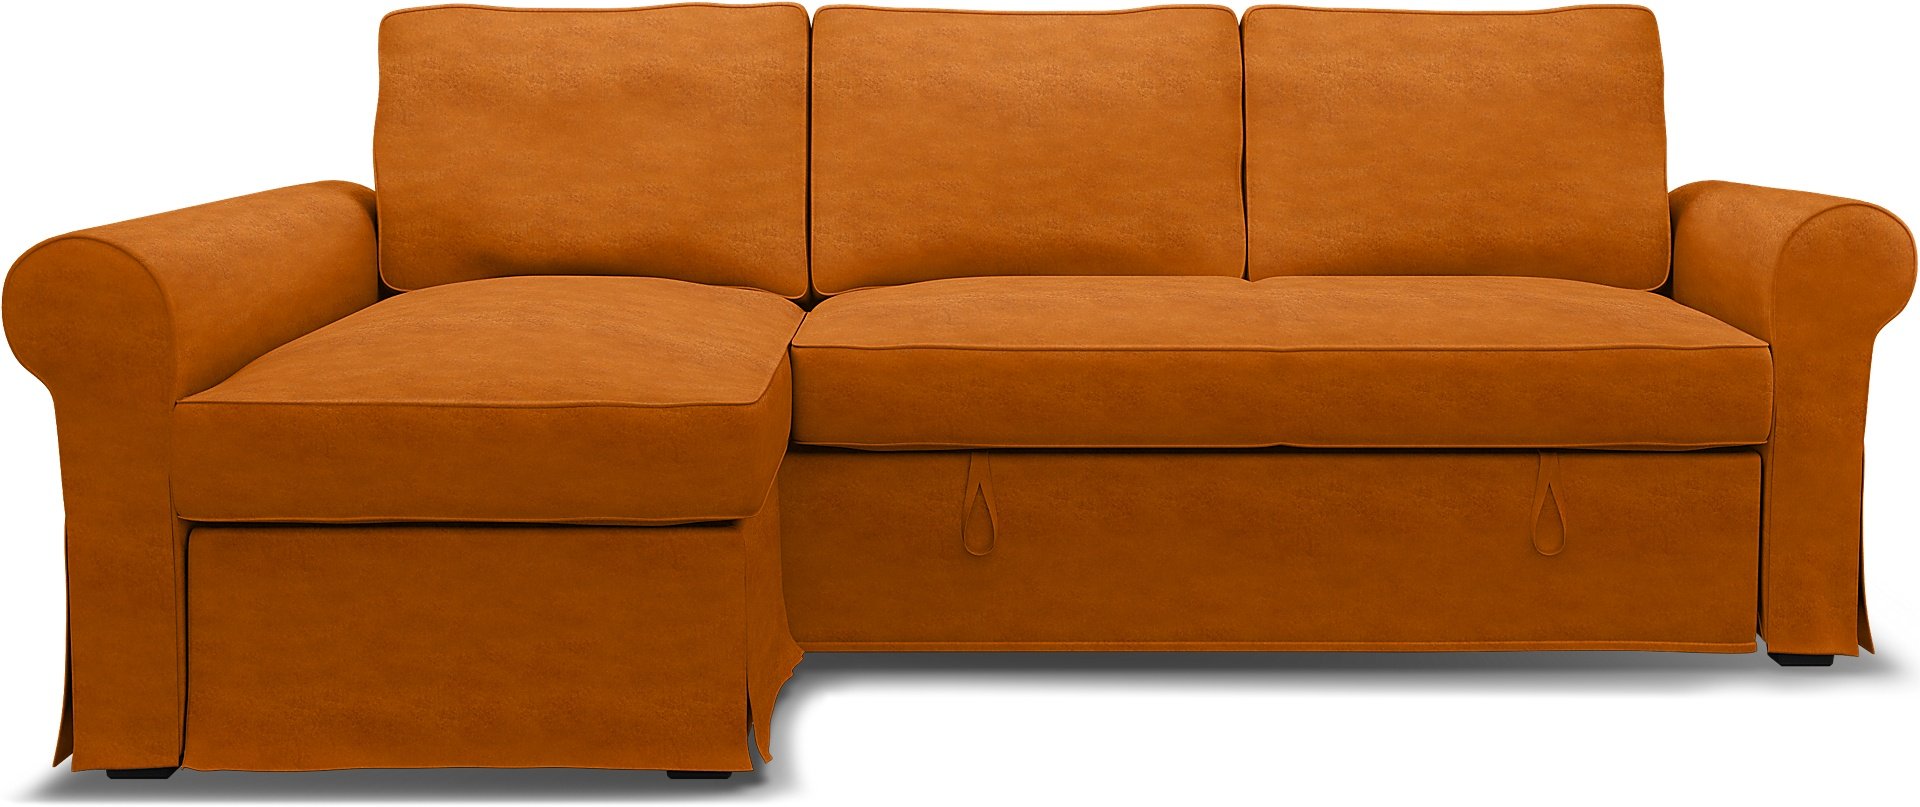 IKEA - Backabro Sofabed with Chaise Cover, Cognac, Velvet - Bemz